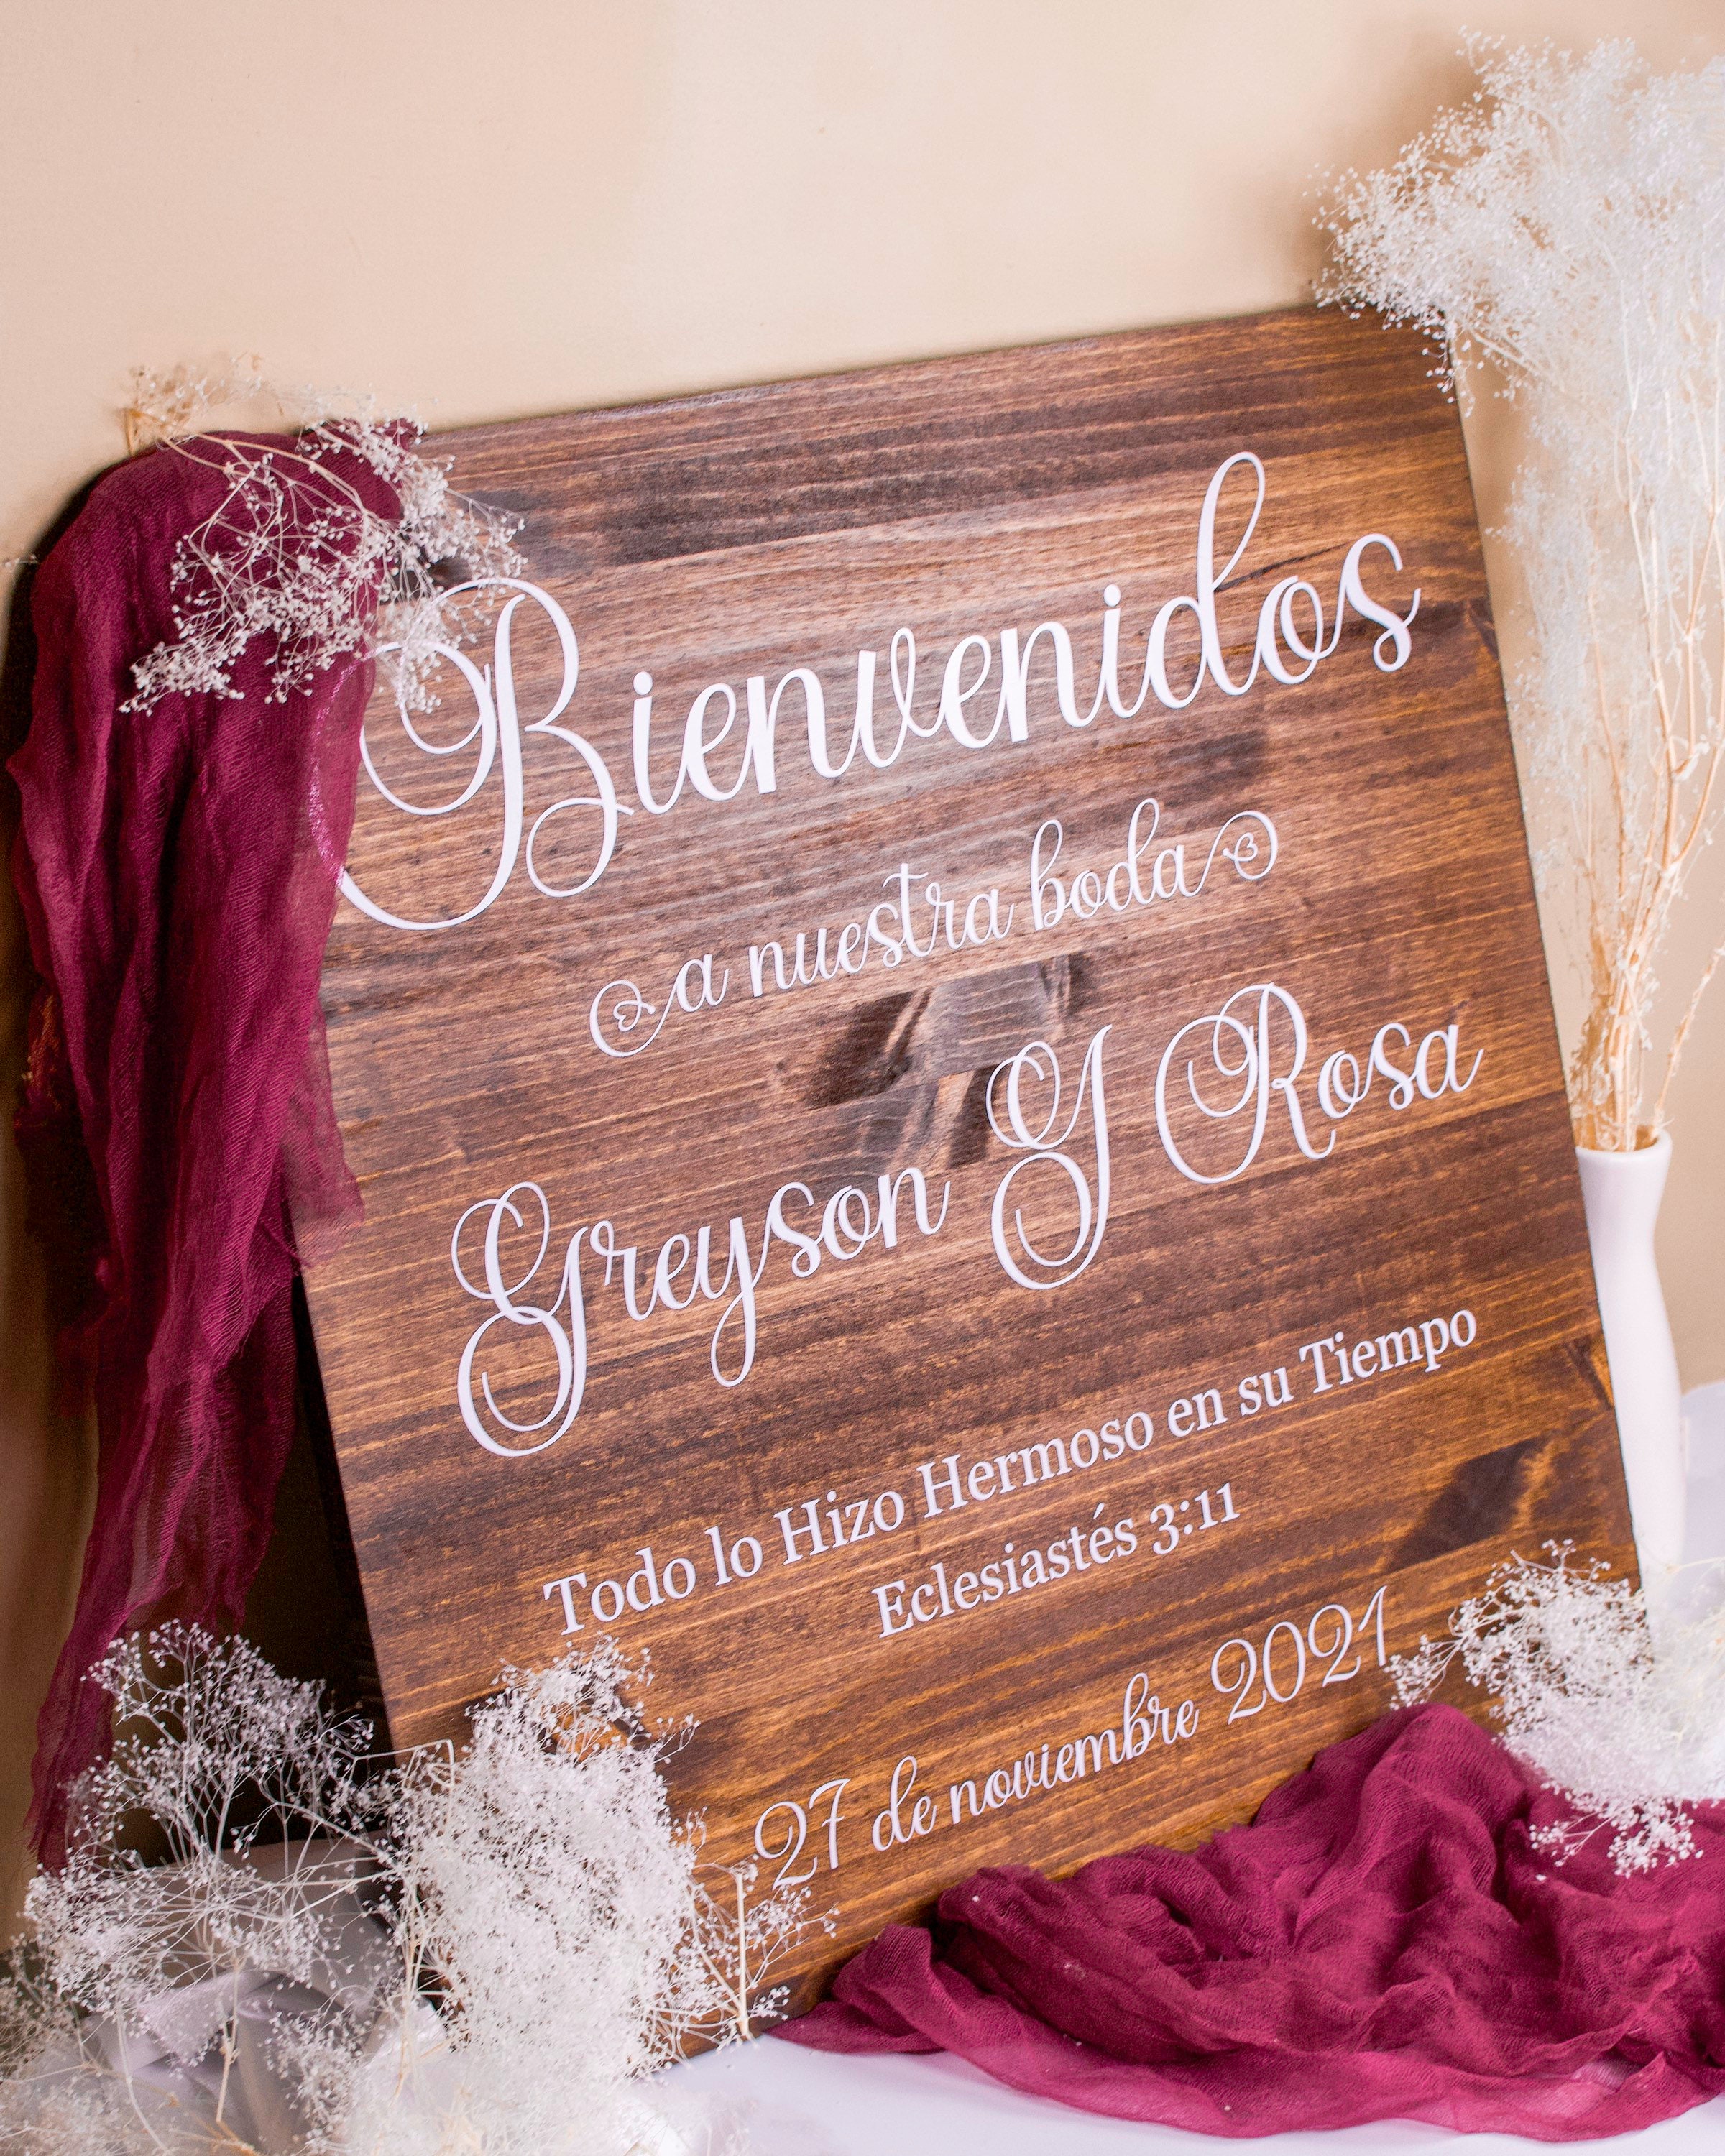 Bienvenidos wedding welcome sign template Mexico agave -  Portugal